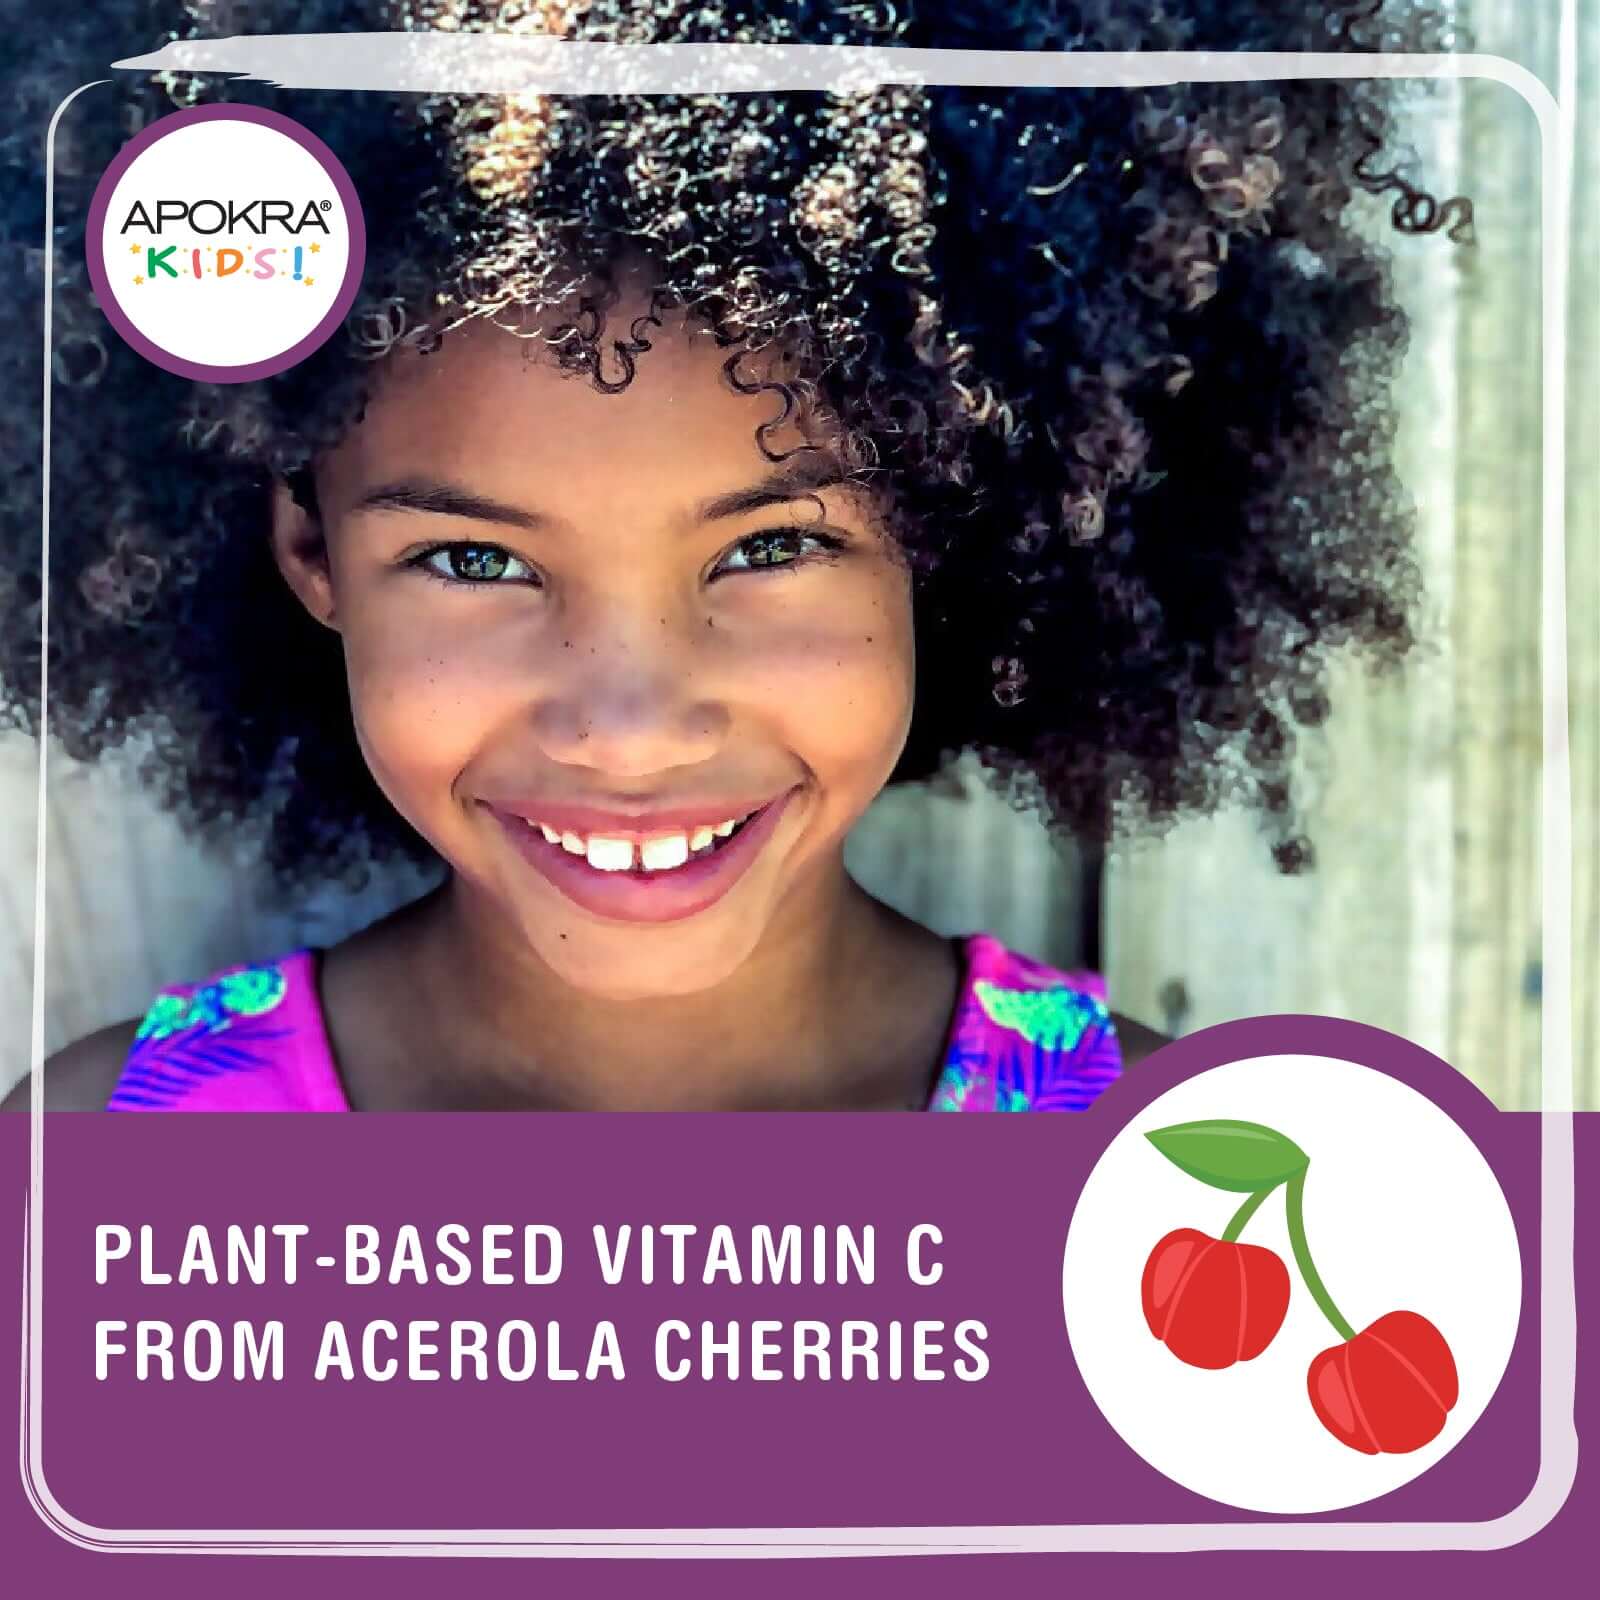 APOKRA Kids Elderberry Syrup with plant based vitamin C from acerola cherries